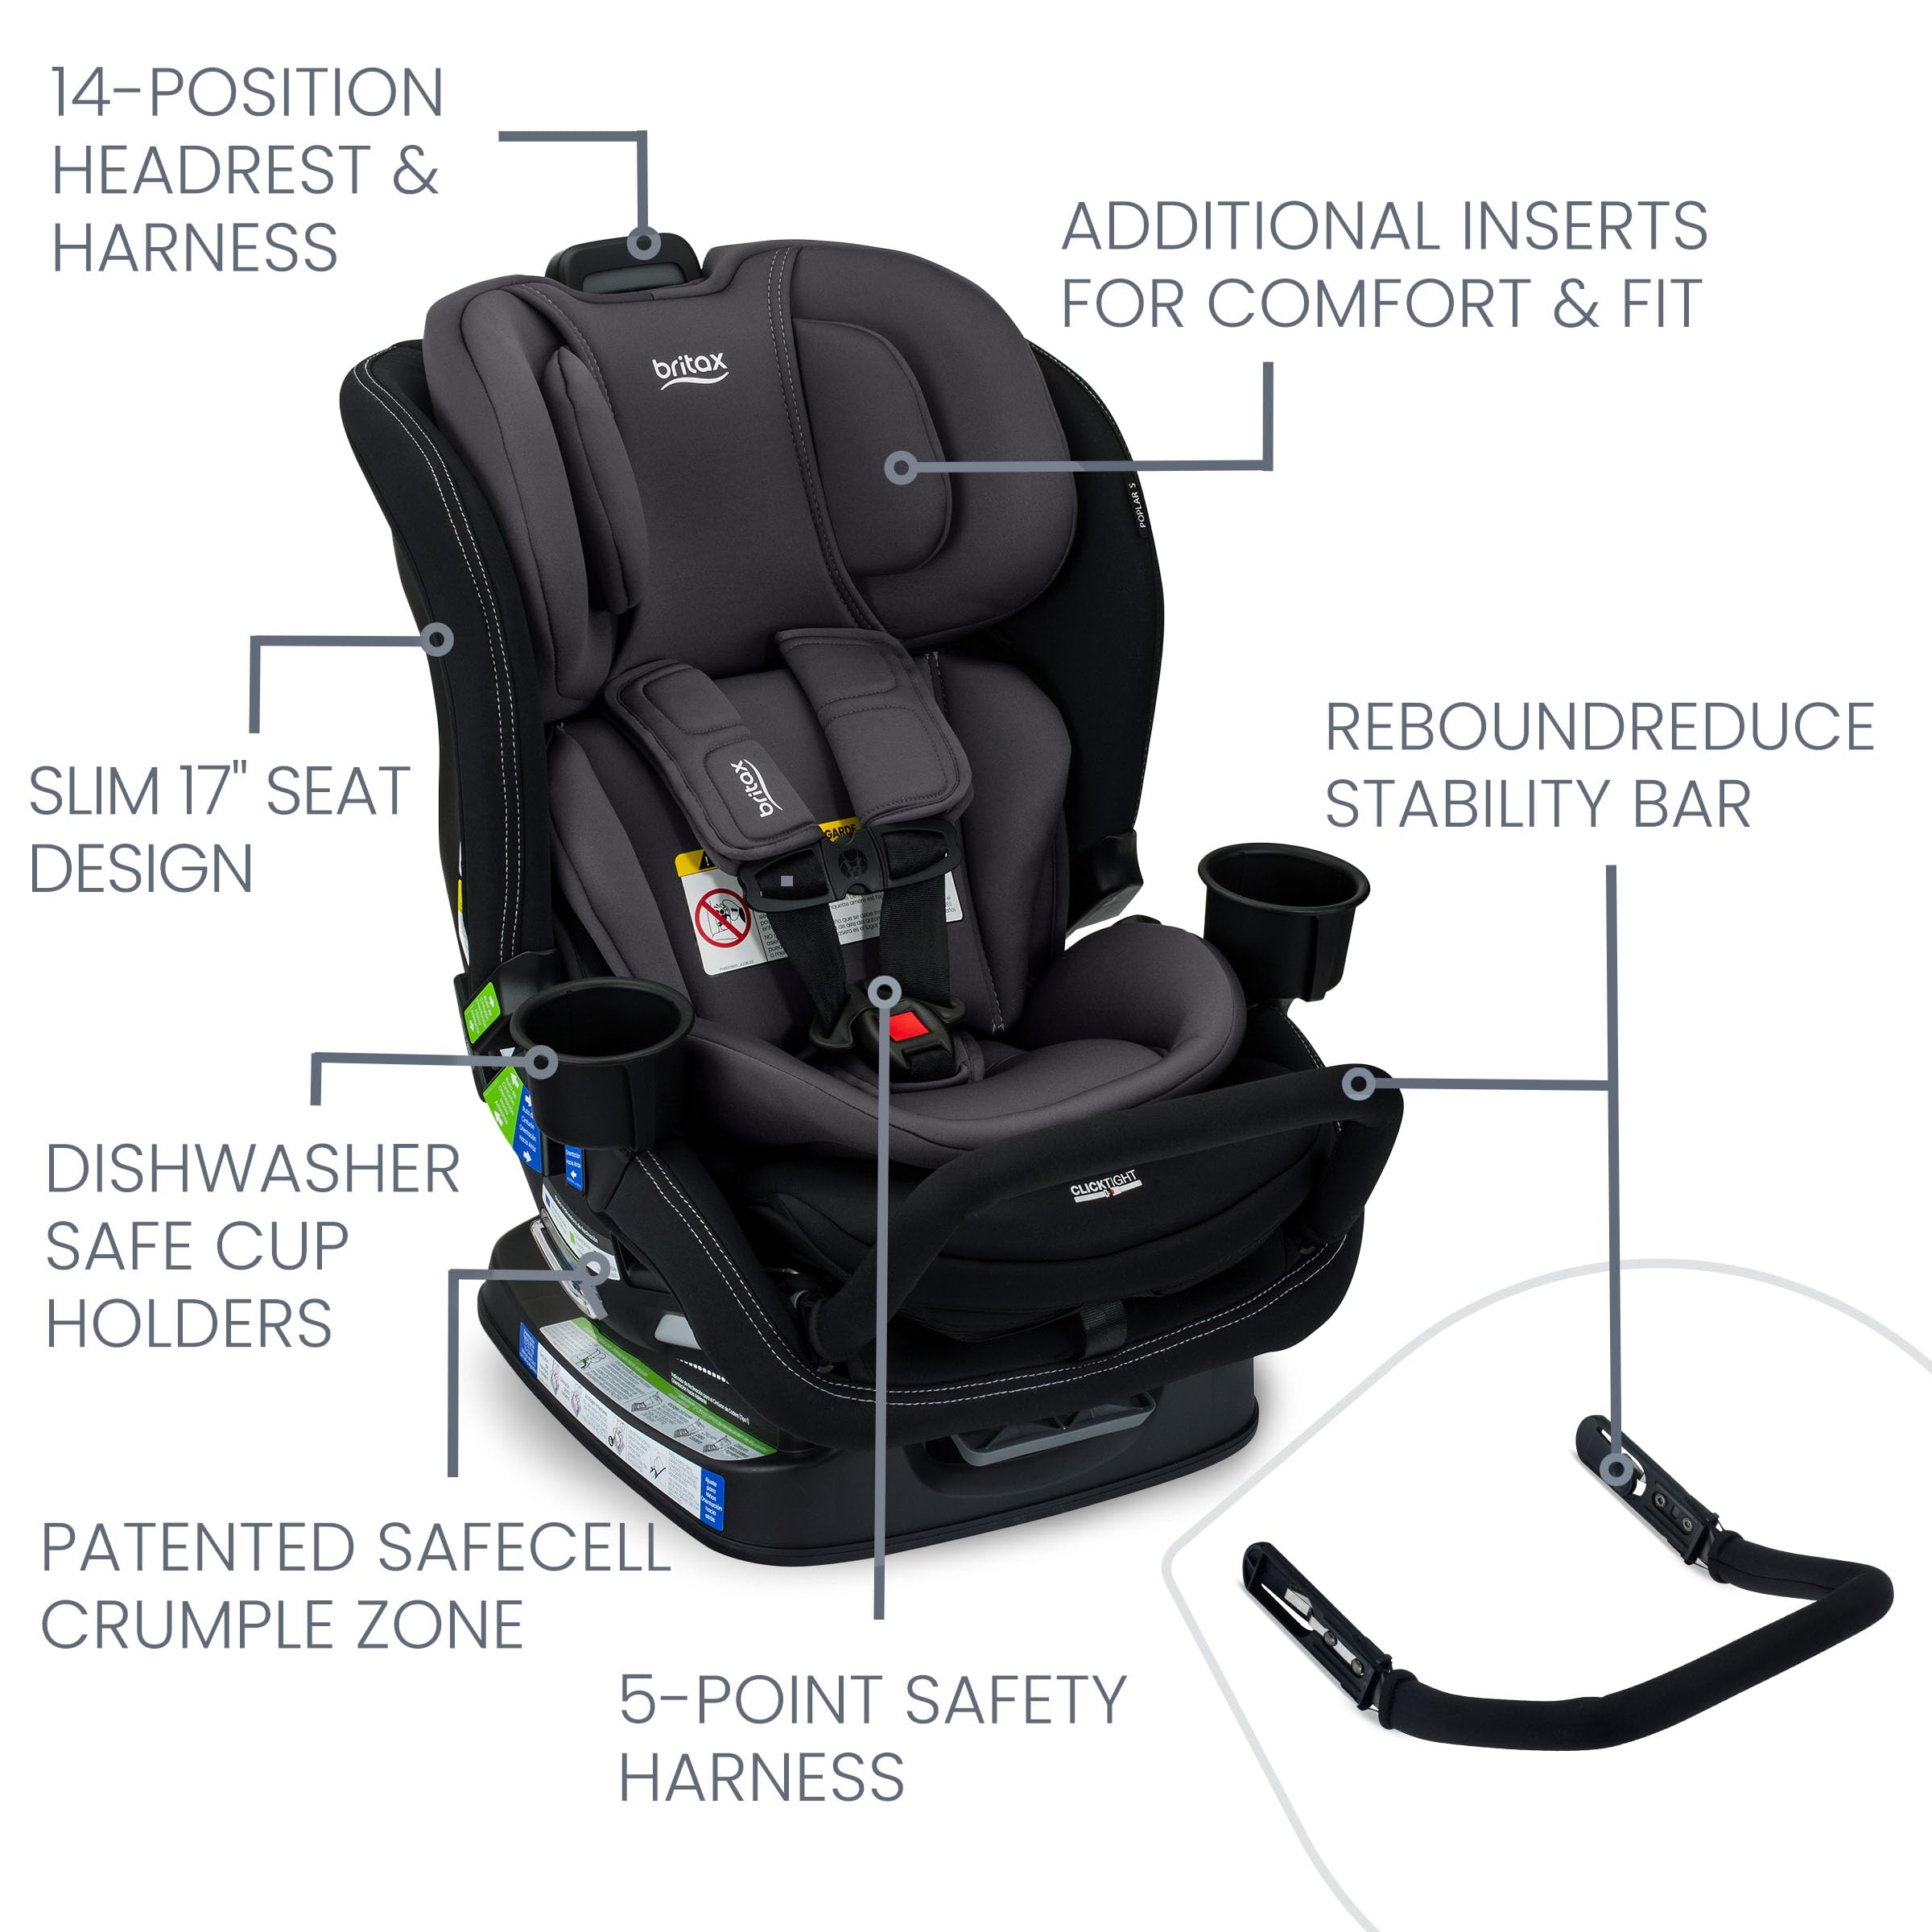 Britax Poplar S Convertible Car Seat, 2-in-1 Car Seat with Slim 17-Inch Design, ClickTight Technology, Stone Onyx